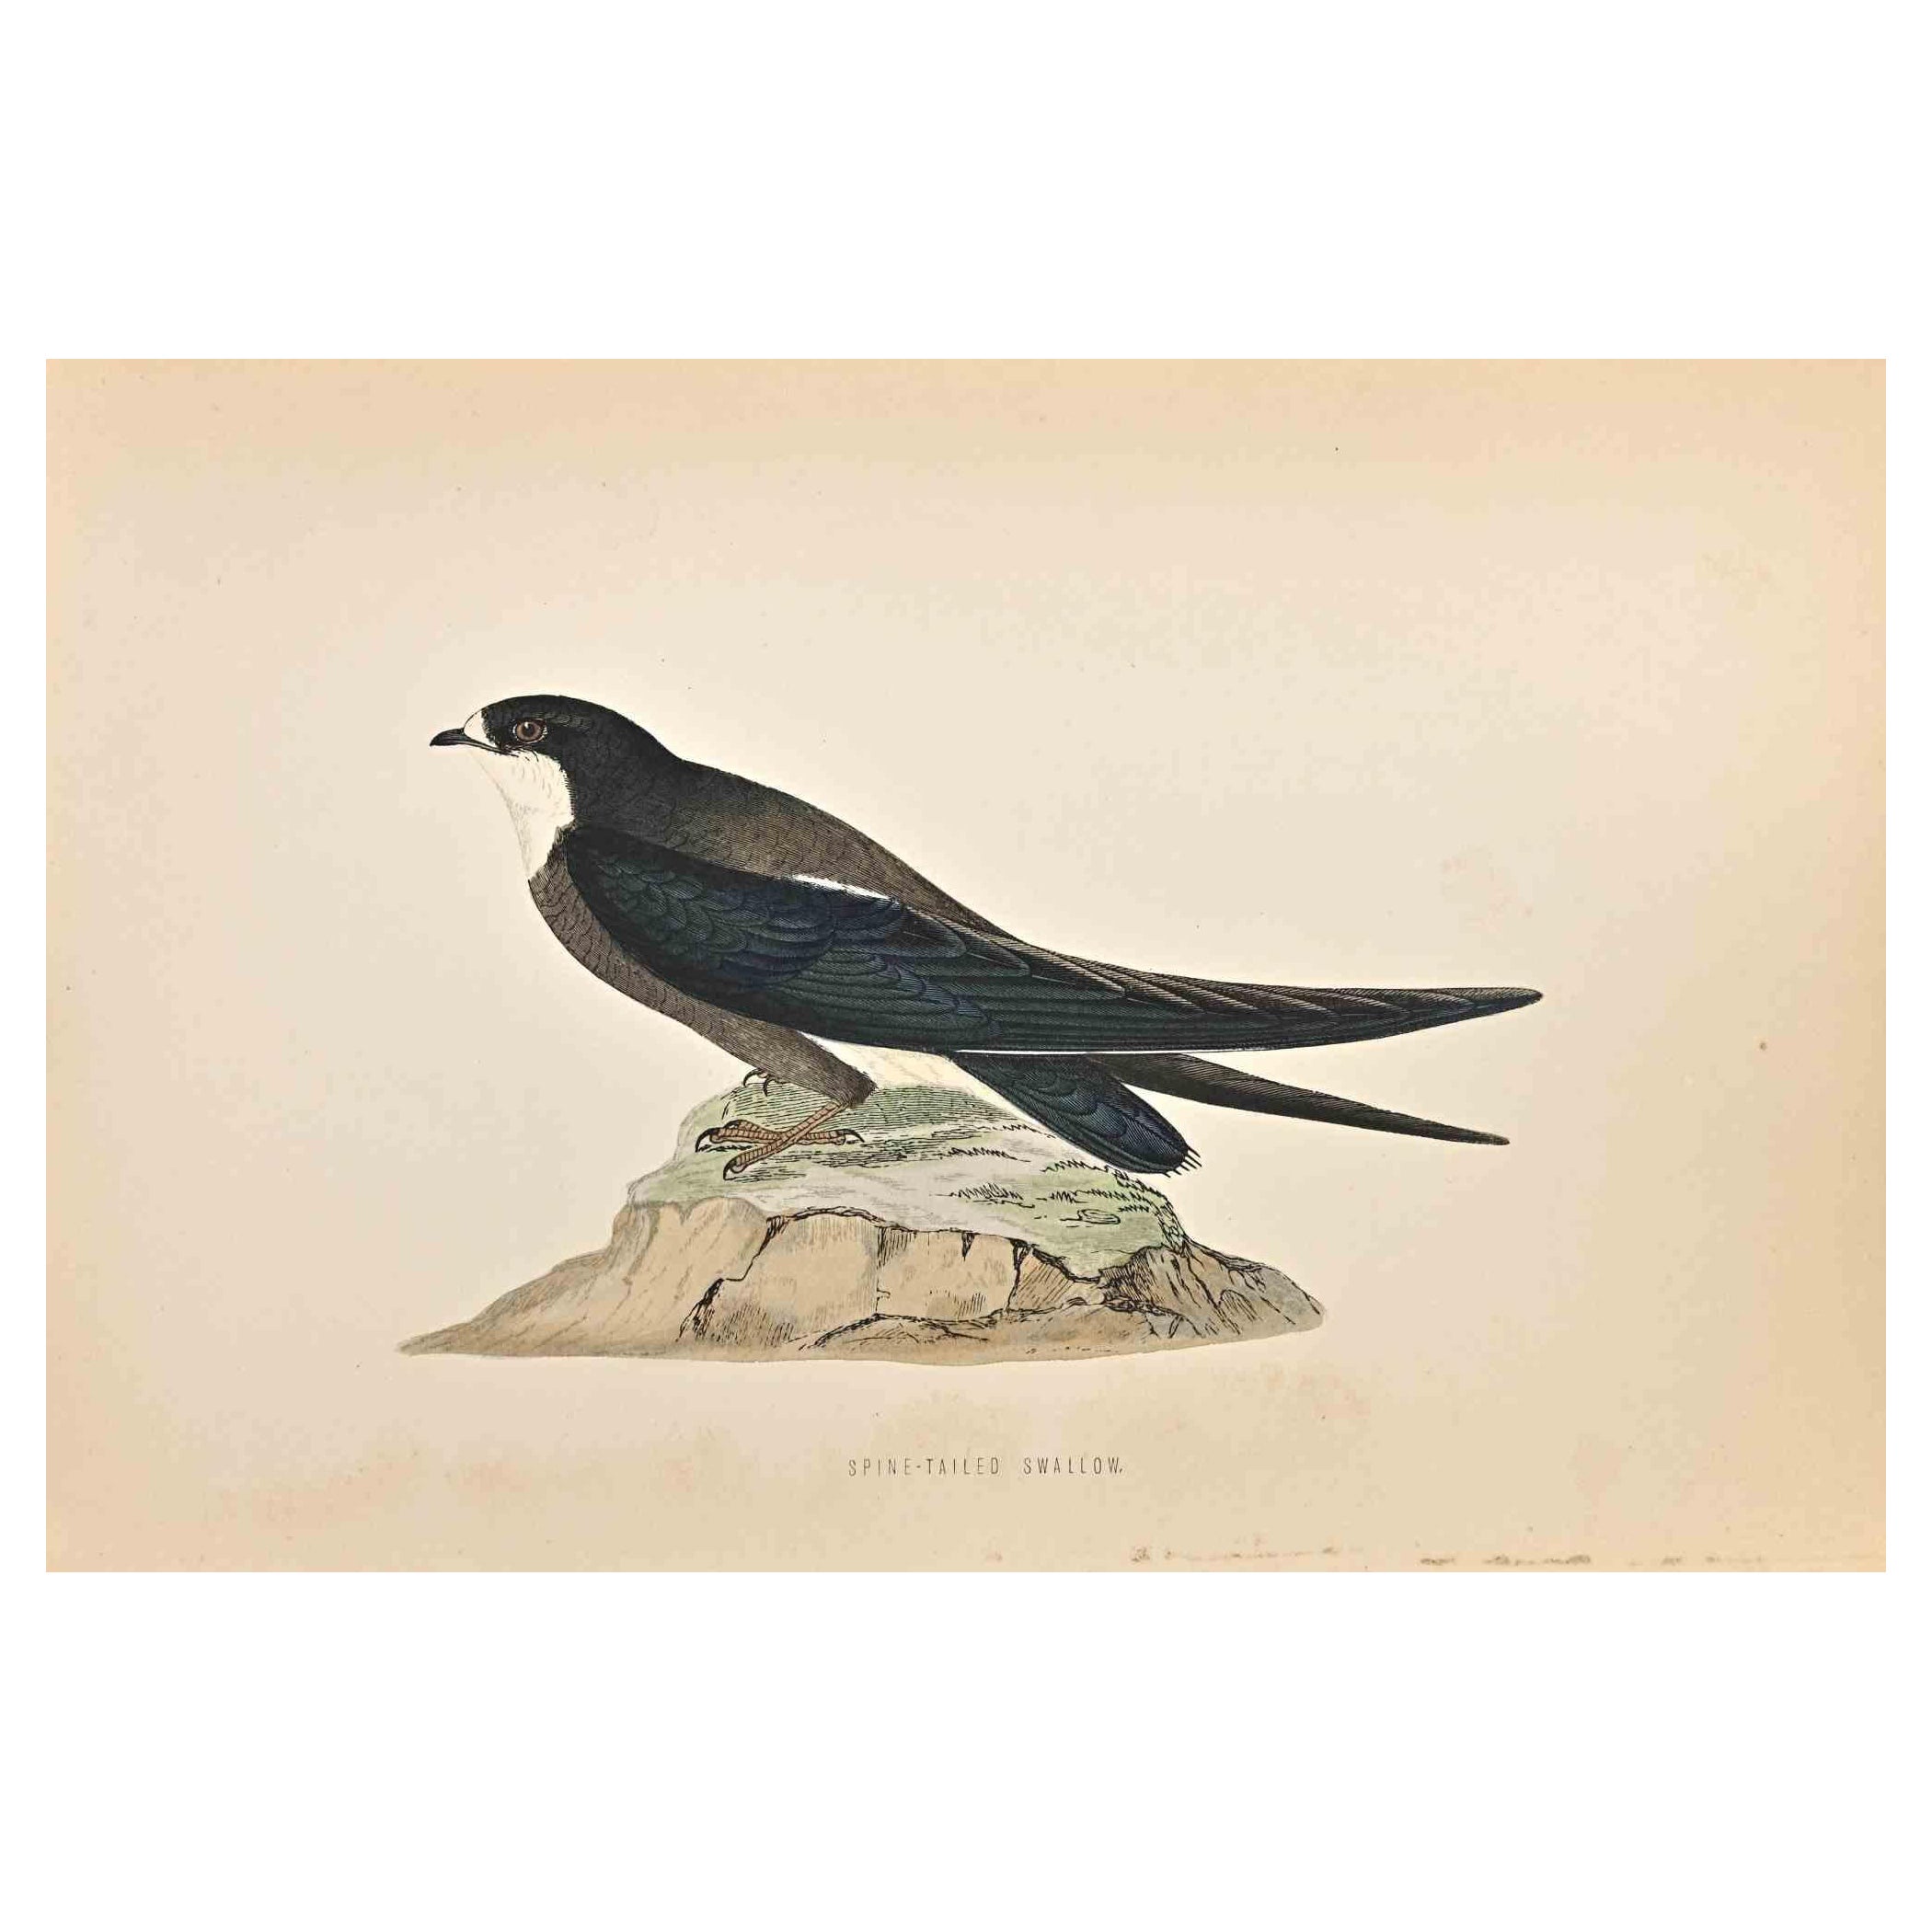 Spine-Tailed Swallow is a modern artwork realized in 1870 by the British artist Alexander Francis Lydon (1836-1917) . 

Woodcut print, hand colored, published by London, Bell & Sons, 1870.  Name of the bird printed in plate. This work is part of a